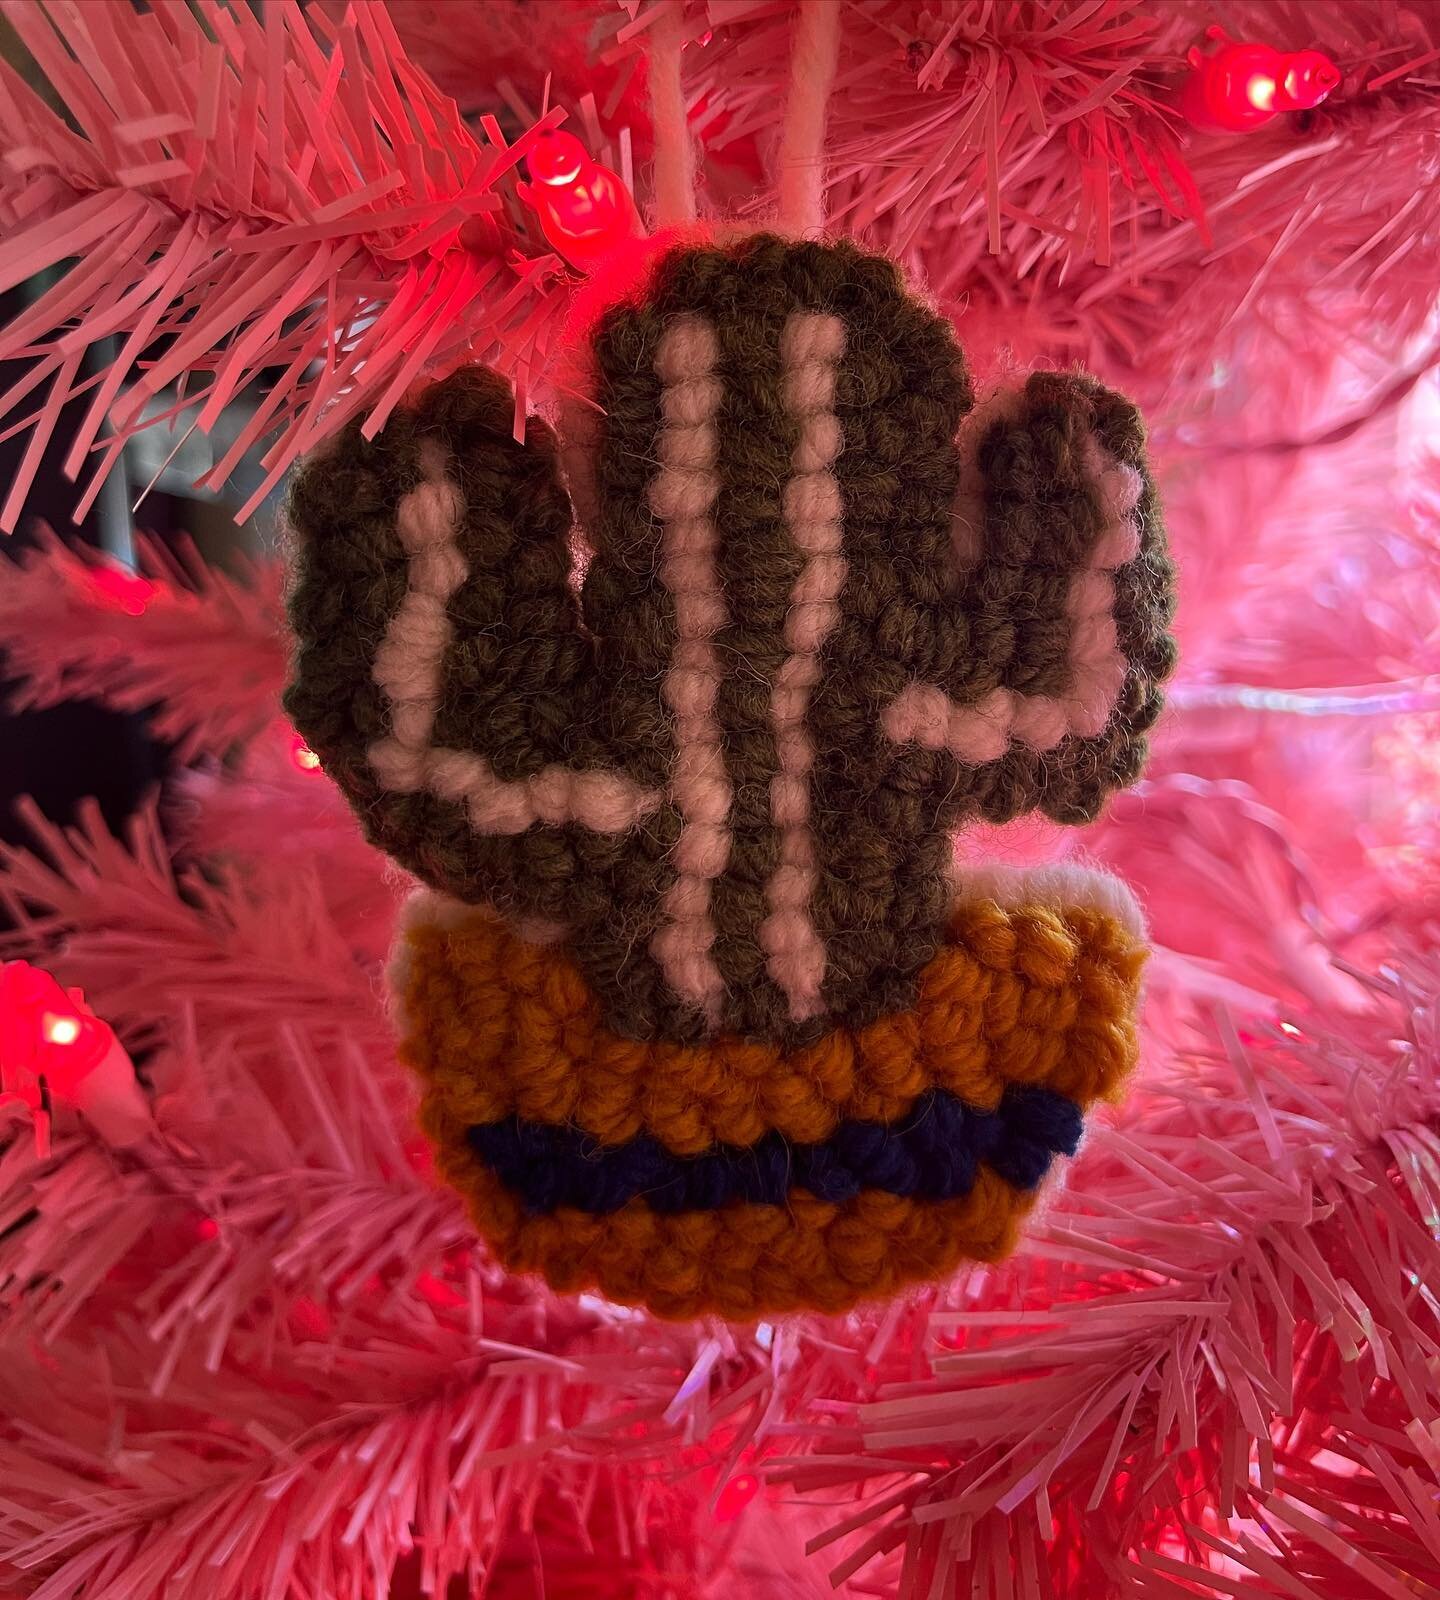 For the holiday season, I&rsquo;ll be highlighting some of the handmade ornaments I&rsquo;ve created. First up, cactus friend. 

#yarn #ornaments #punchneedle #punchneedlerughooking #diy #cactus #christmas #storytellerwool #oxfordpunchneedle